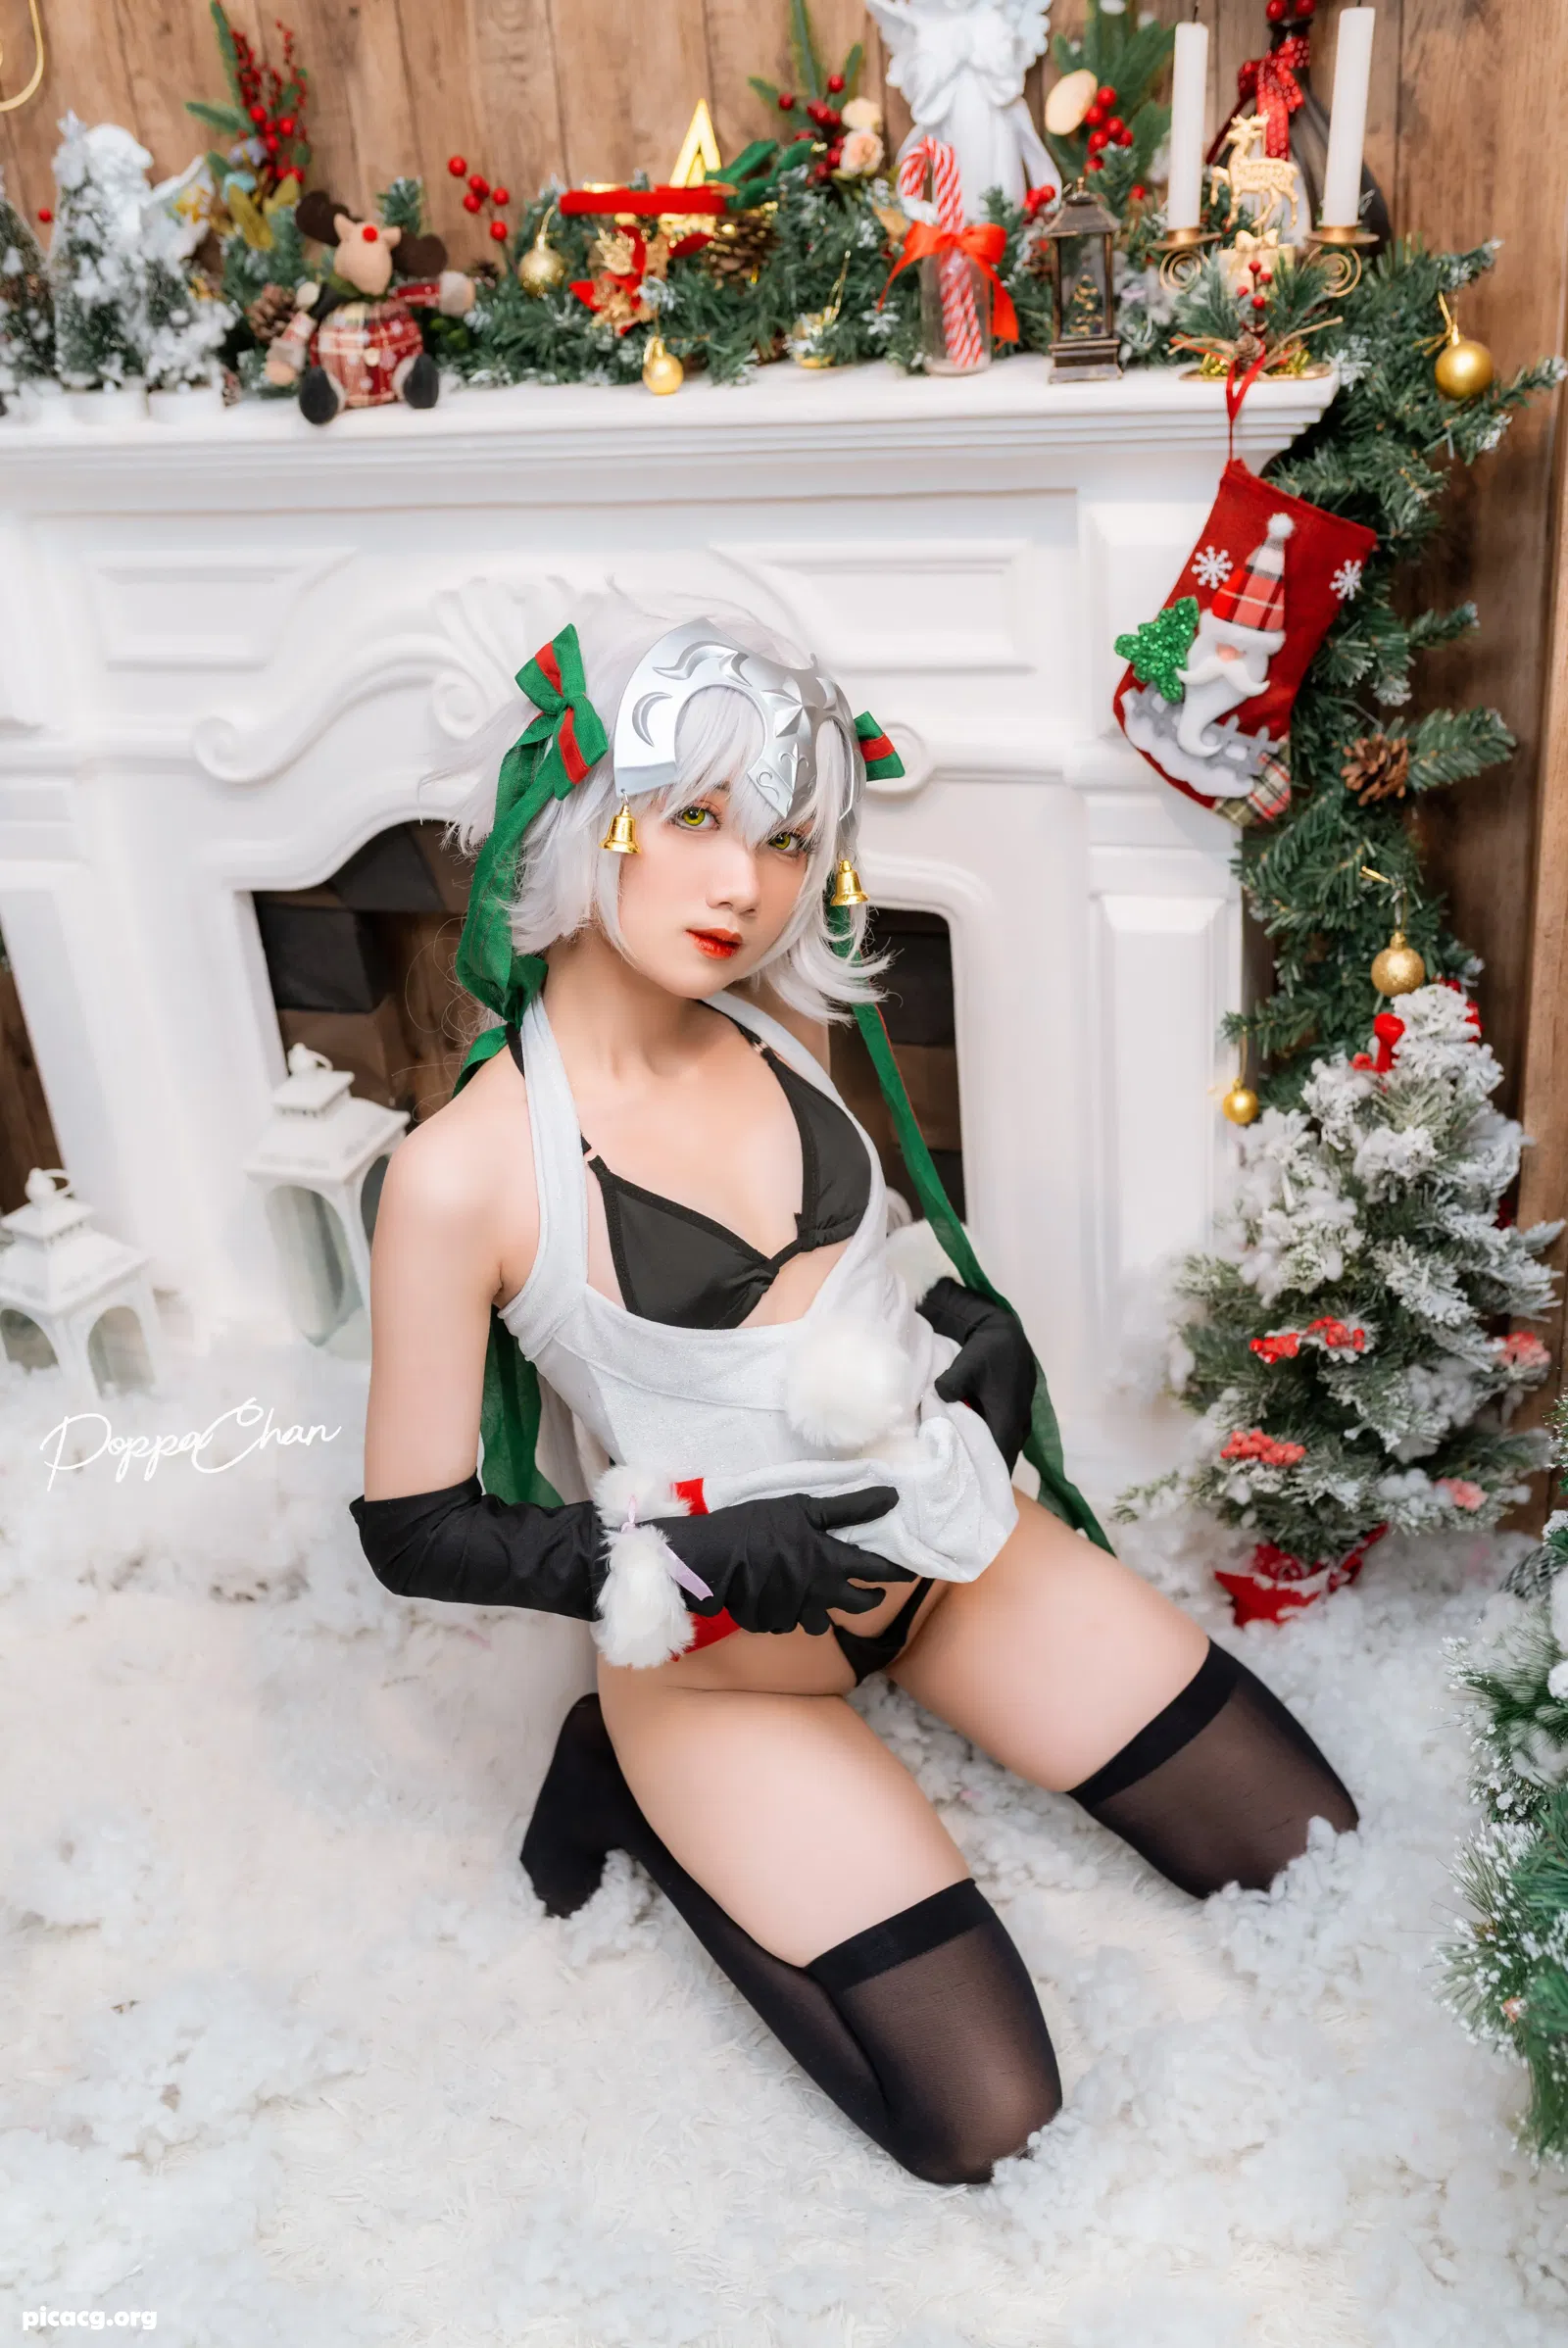 PoppaChan NO.022 Jeanne D'arc Alter Santa Lily (NSFW -Sexy and Lewd content) [26P 4V 155.86MB] - 在线看可下载原图